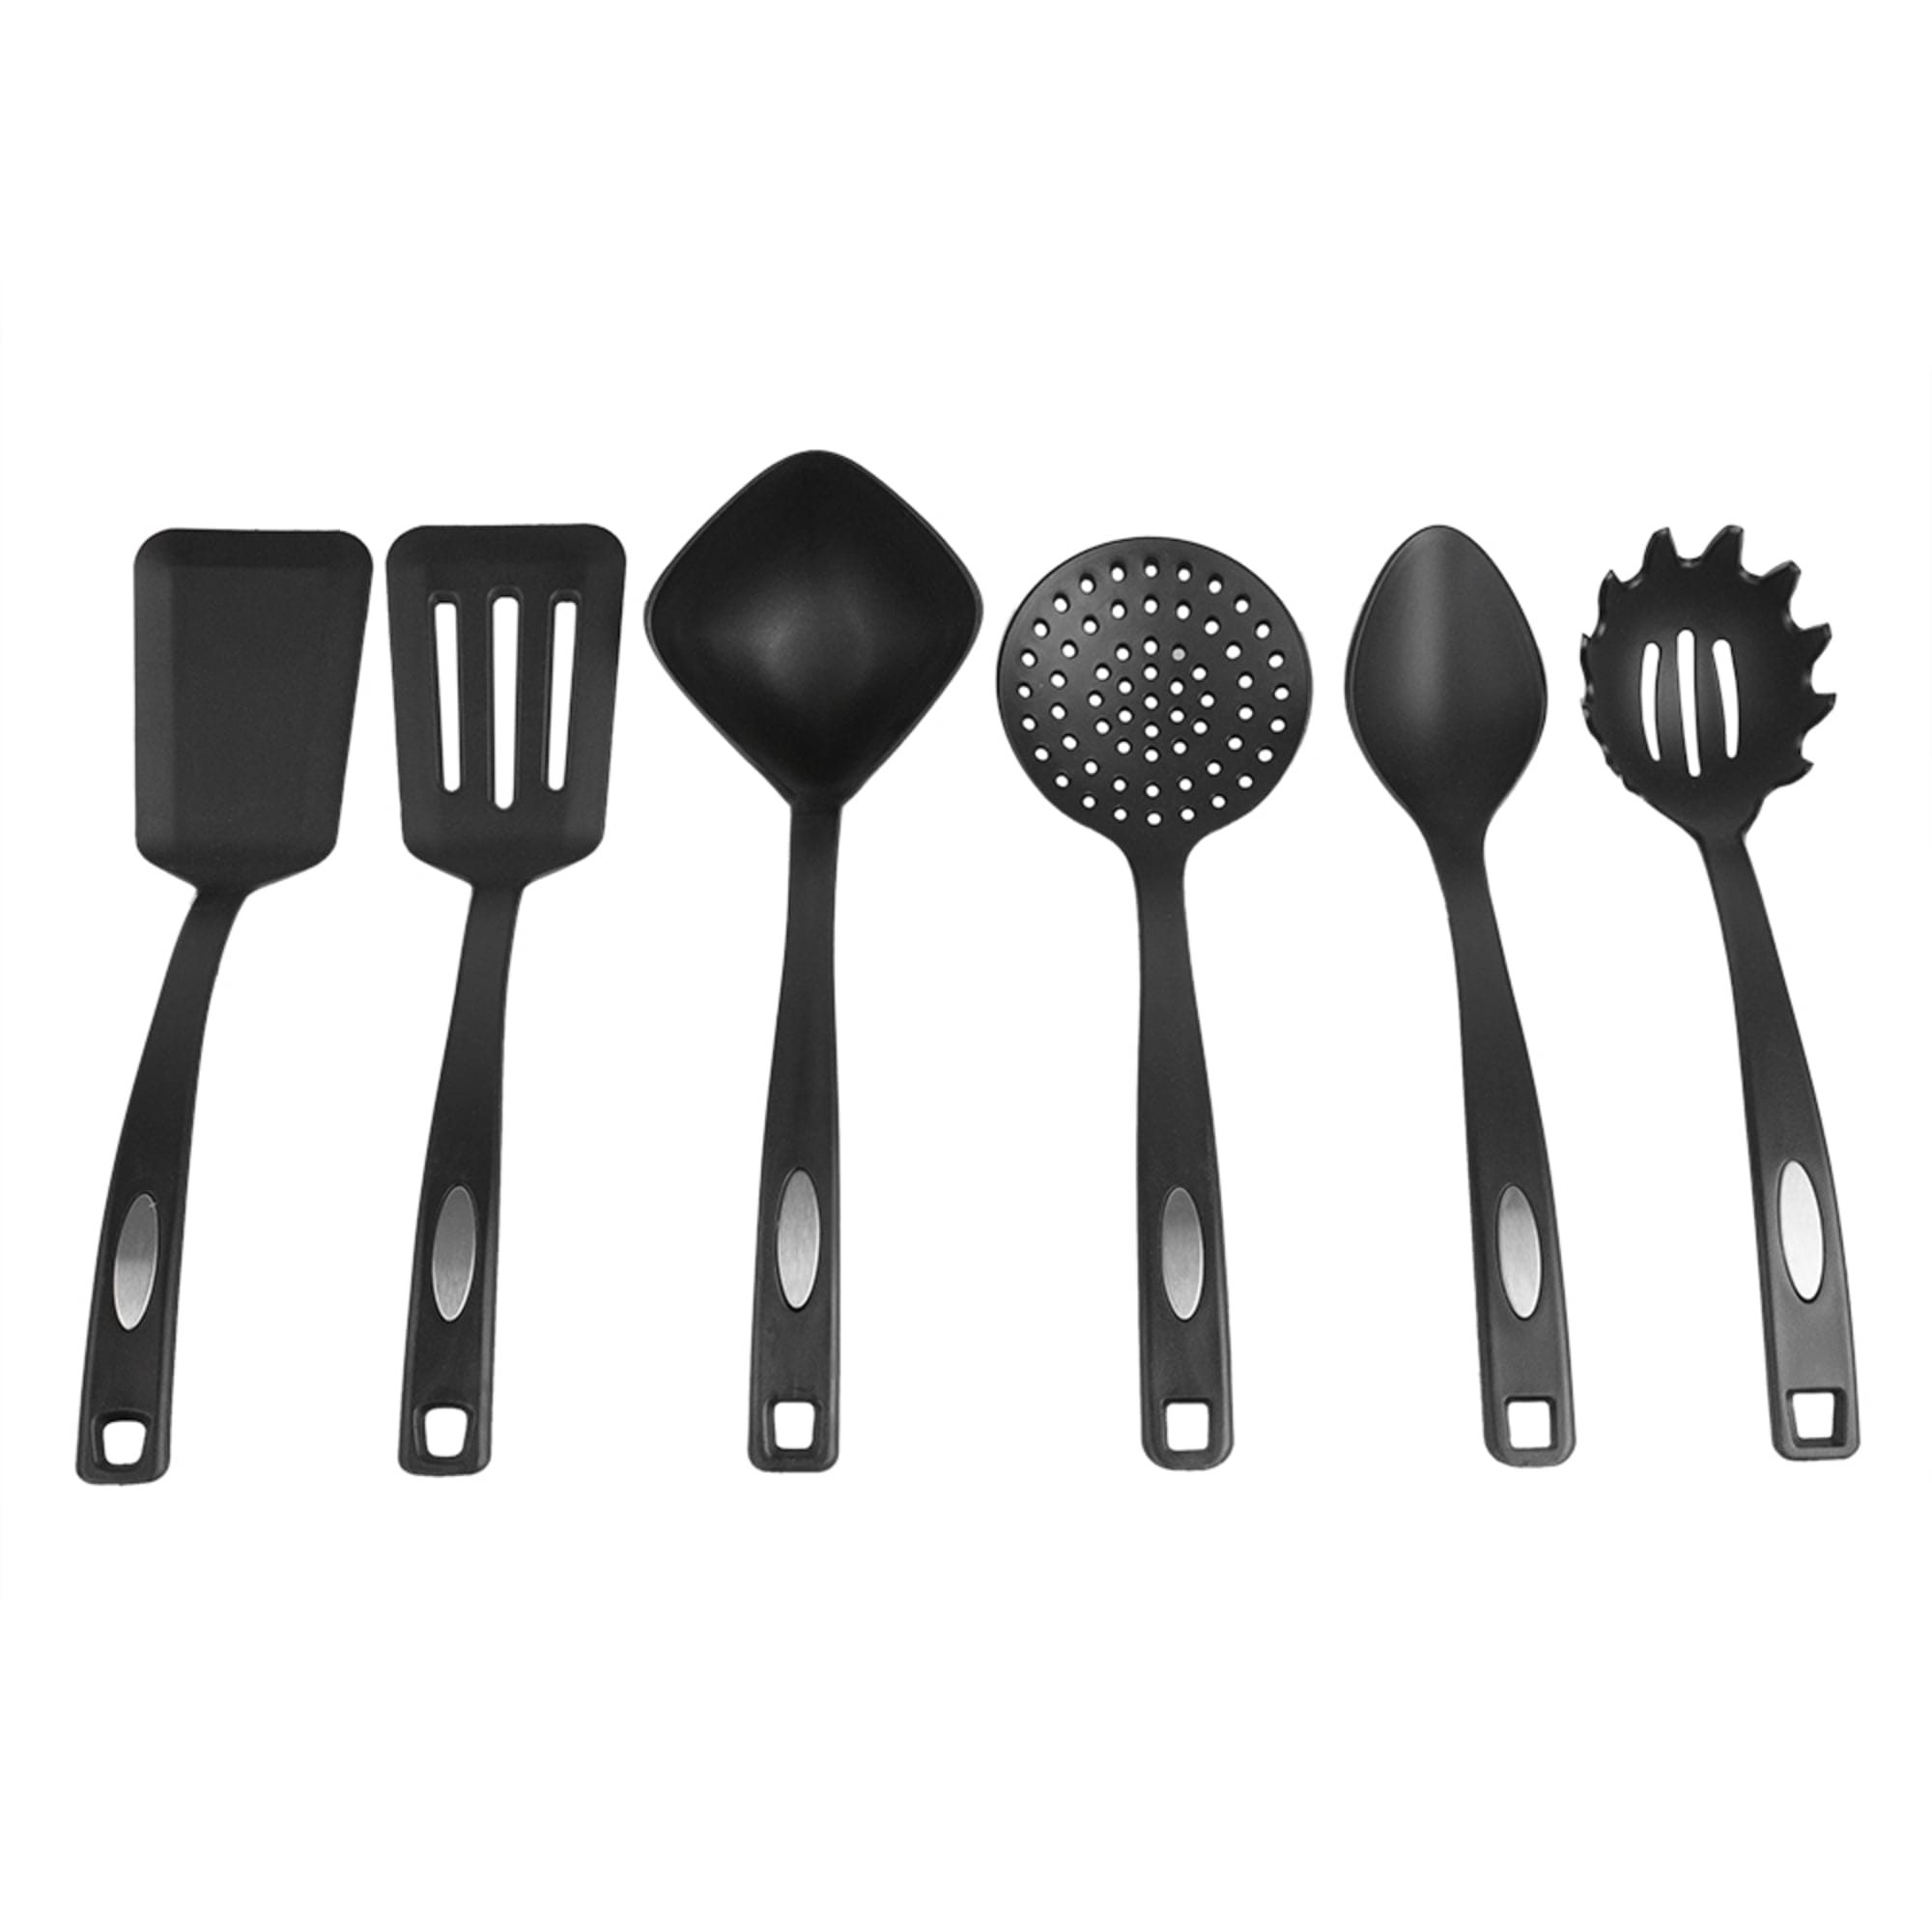 Home Basics 6 Piece Nylon Serving Utensils with Curved Handles, Black $4 EACH, CASE PACK OF 24